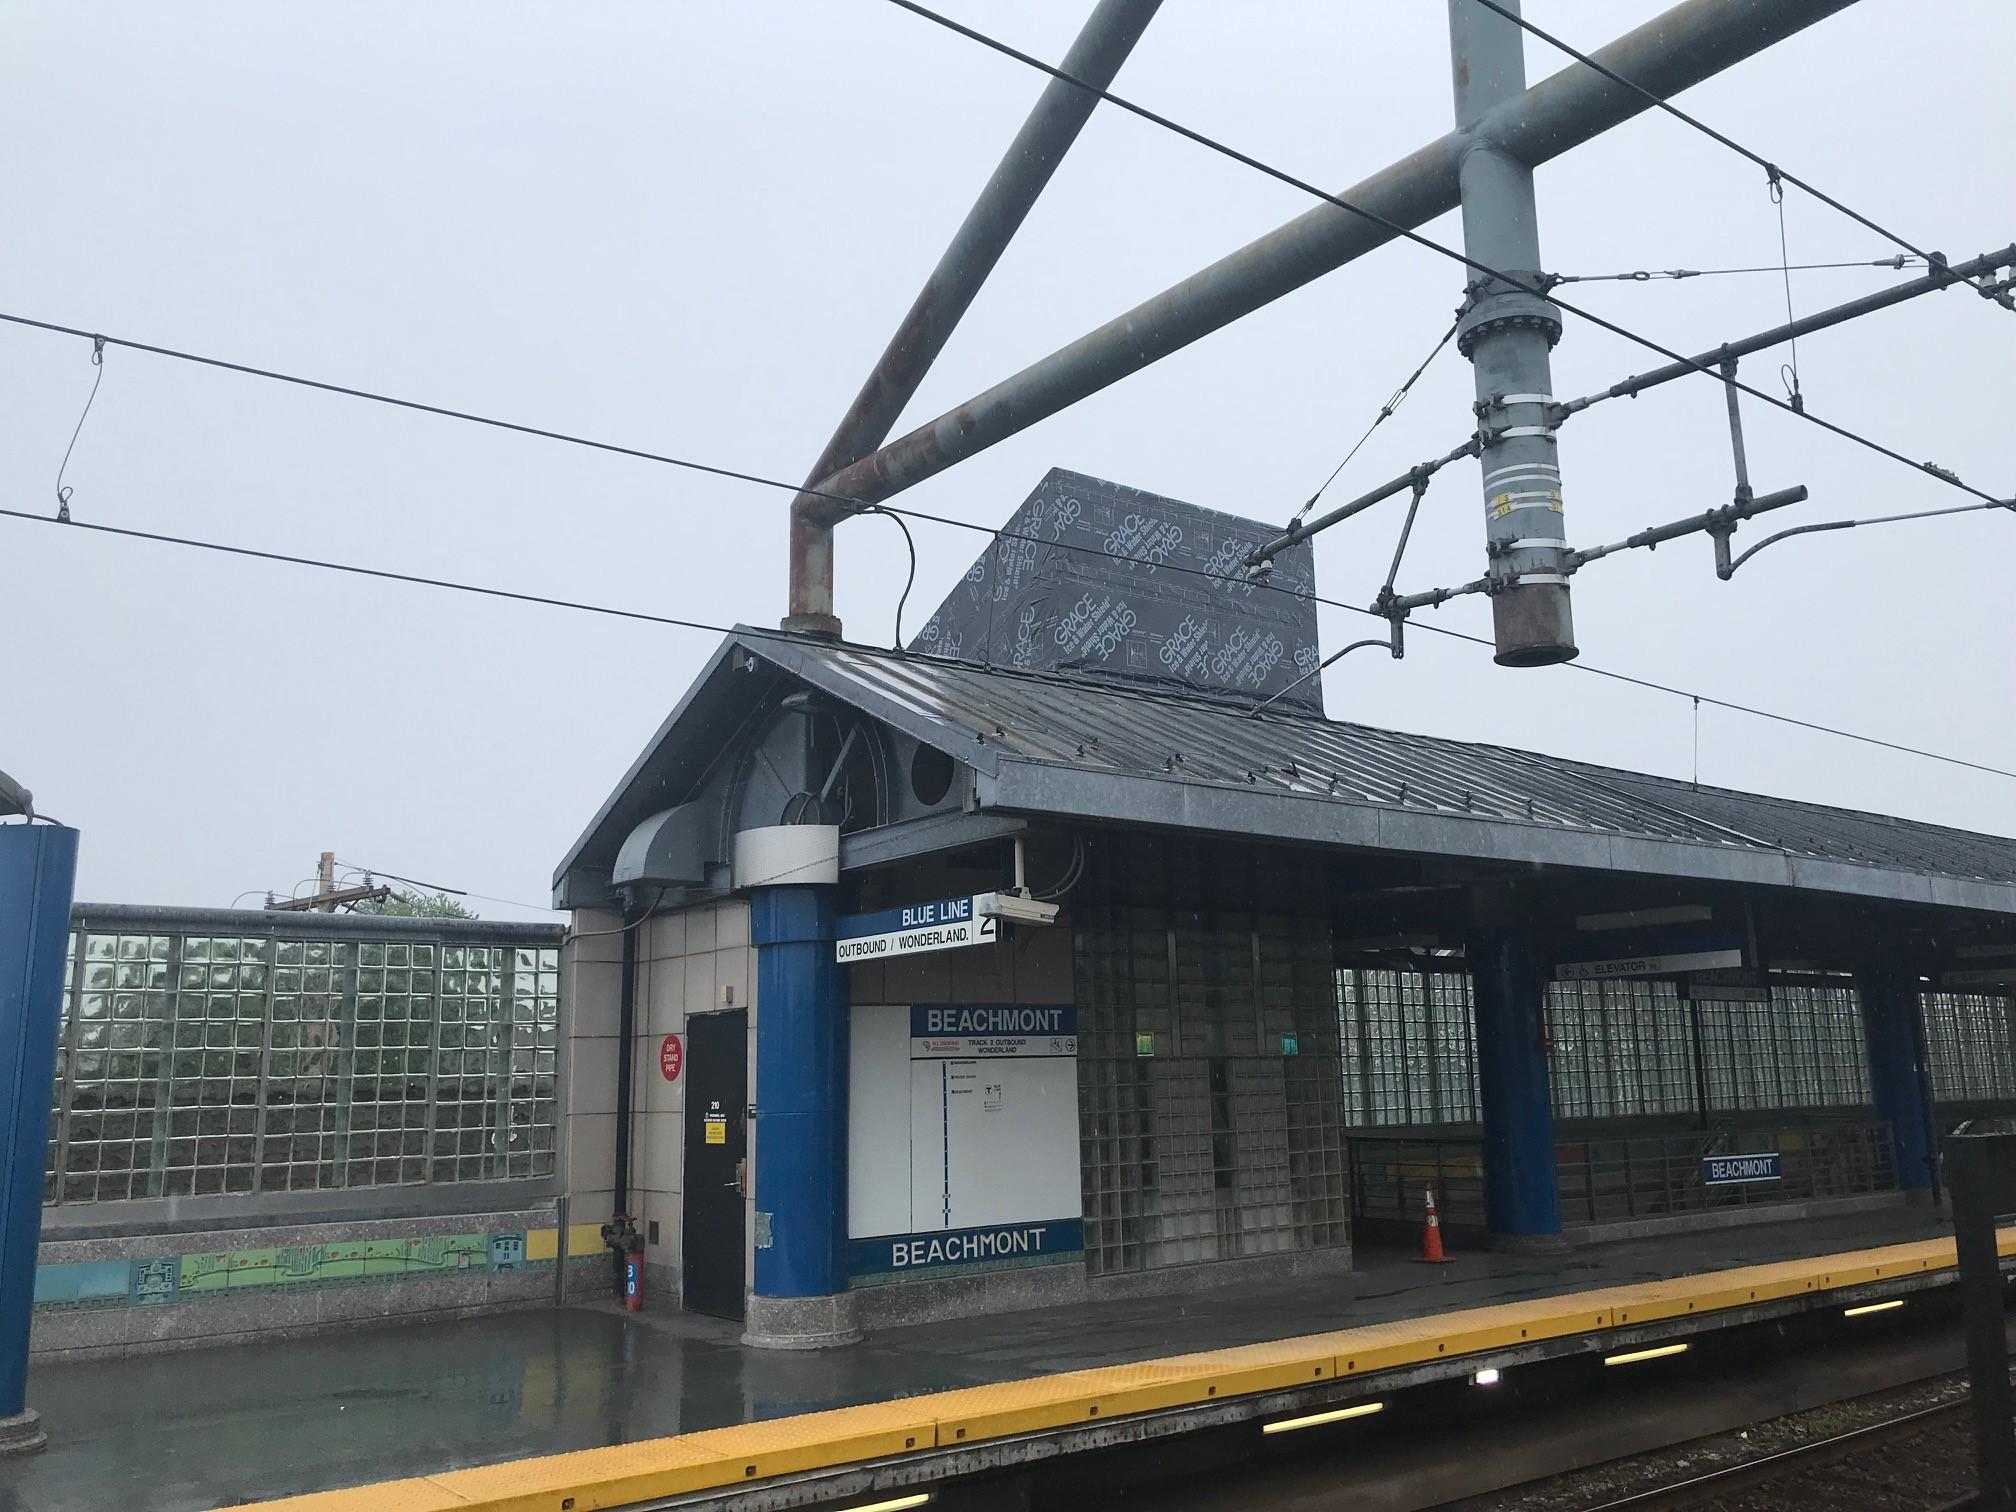 The new elevator at Beachmont Station as seen from the outbound platform